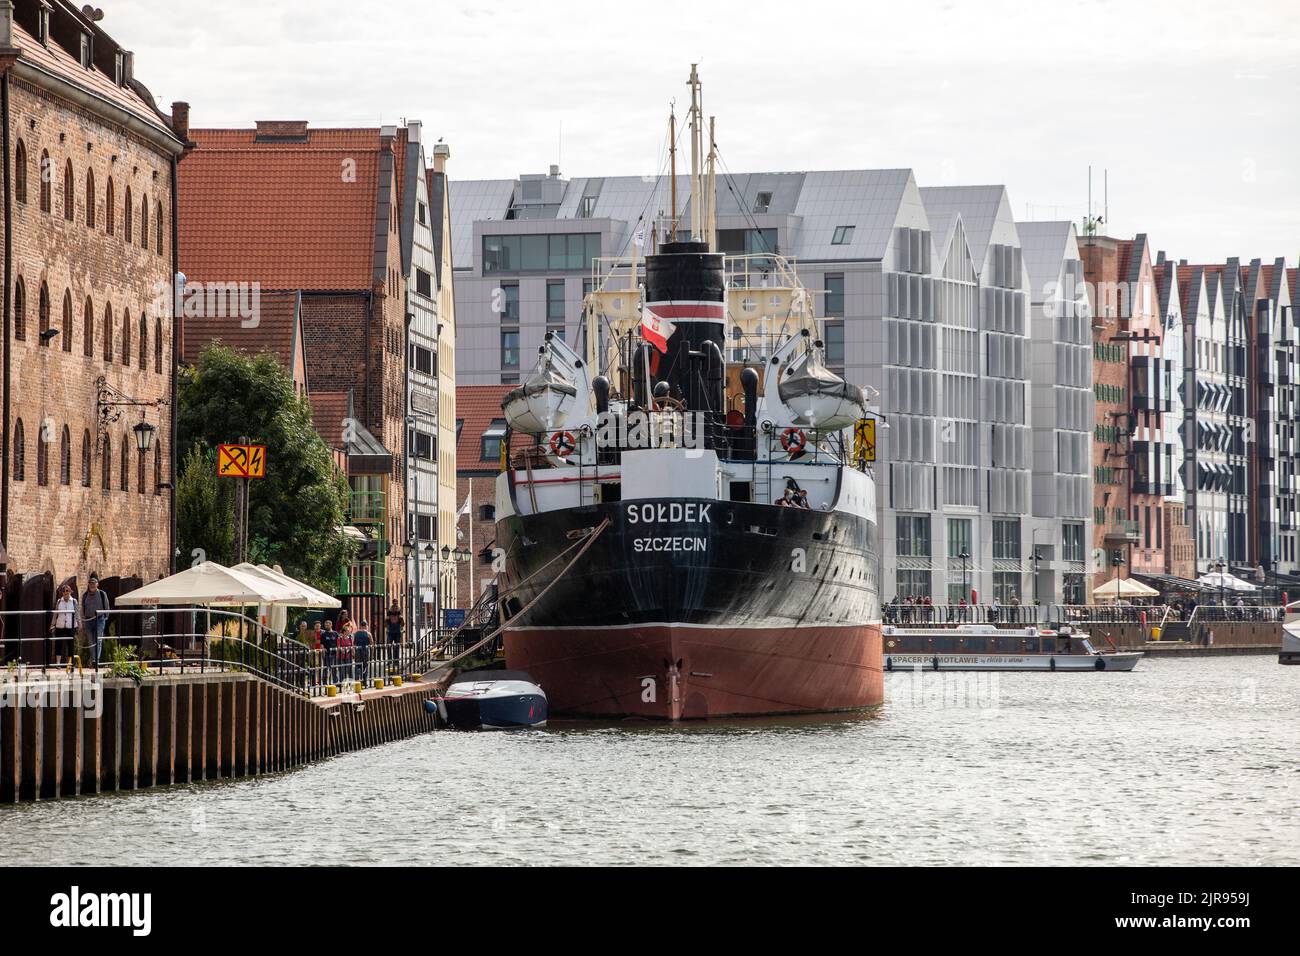 Gdansk, Poland - Sept 9, 2020: Soldek the first ship built in Poland after World War II to the Gdansk shipyard and museum ship today Stock Photo